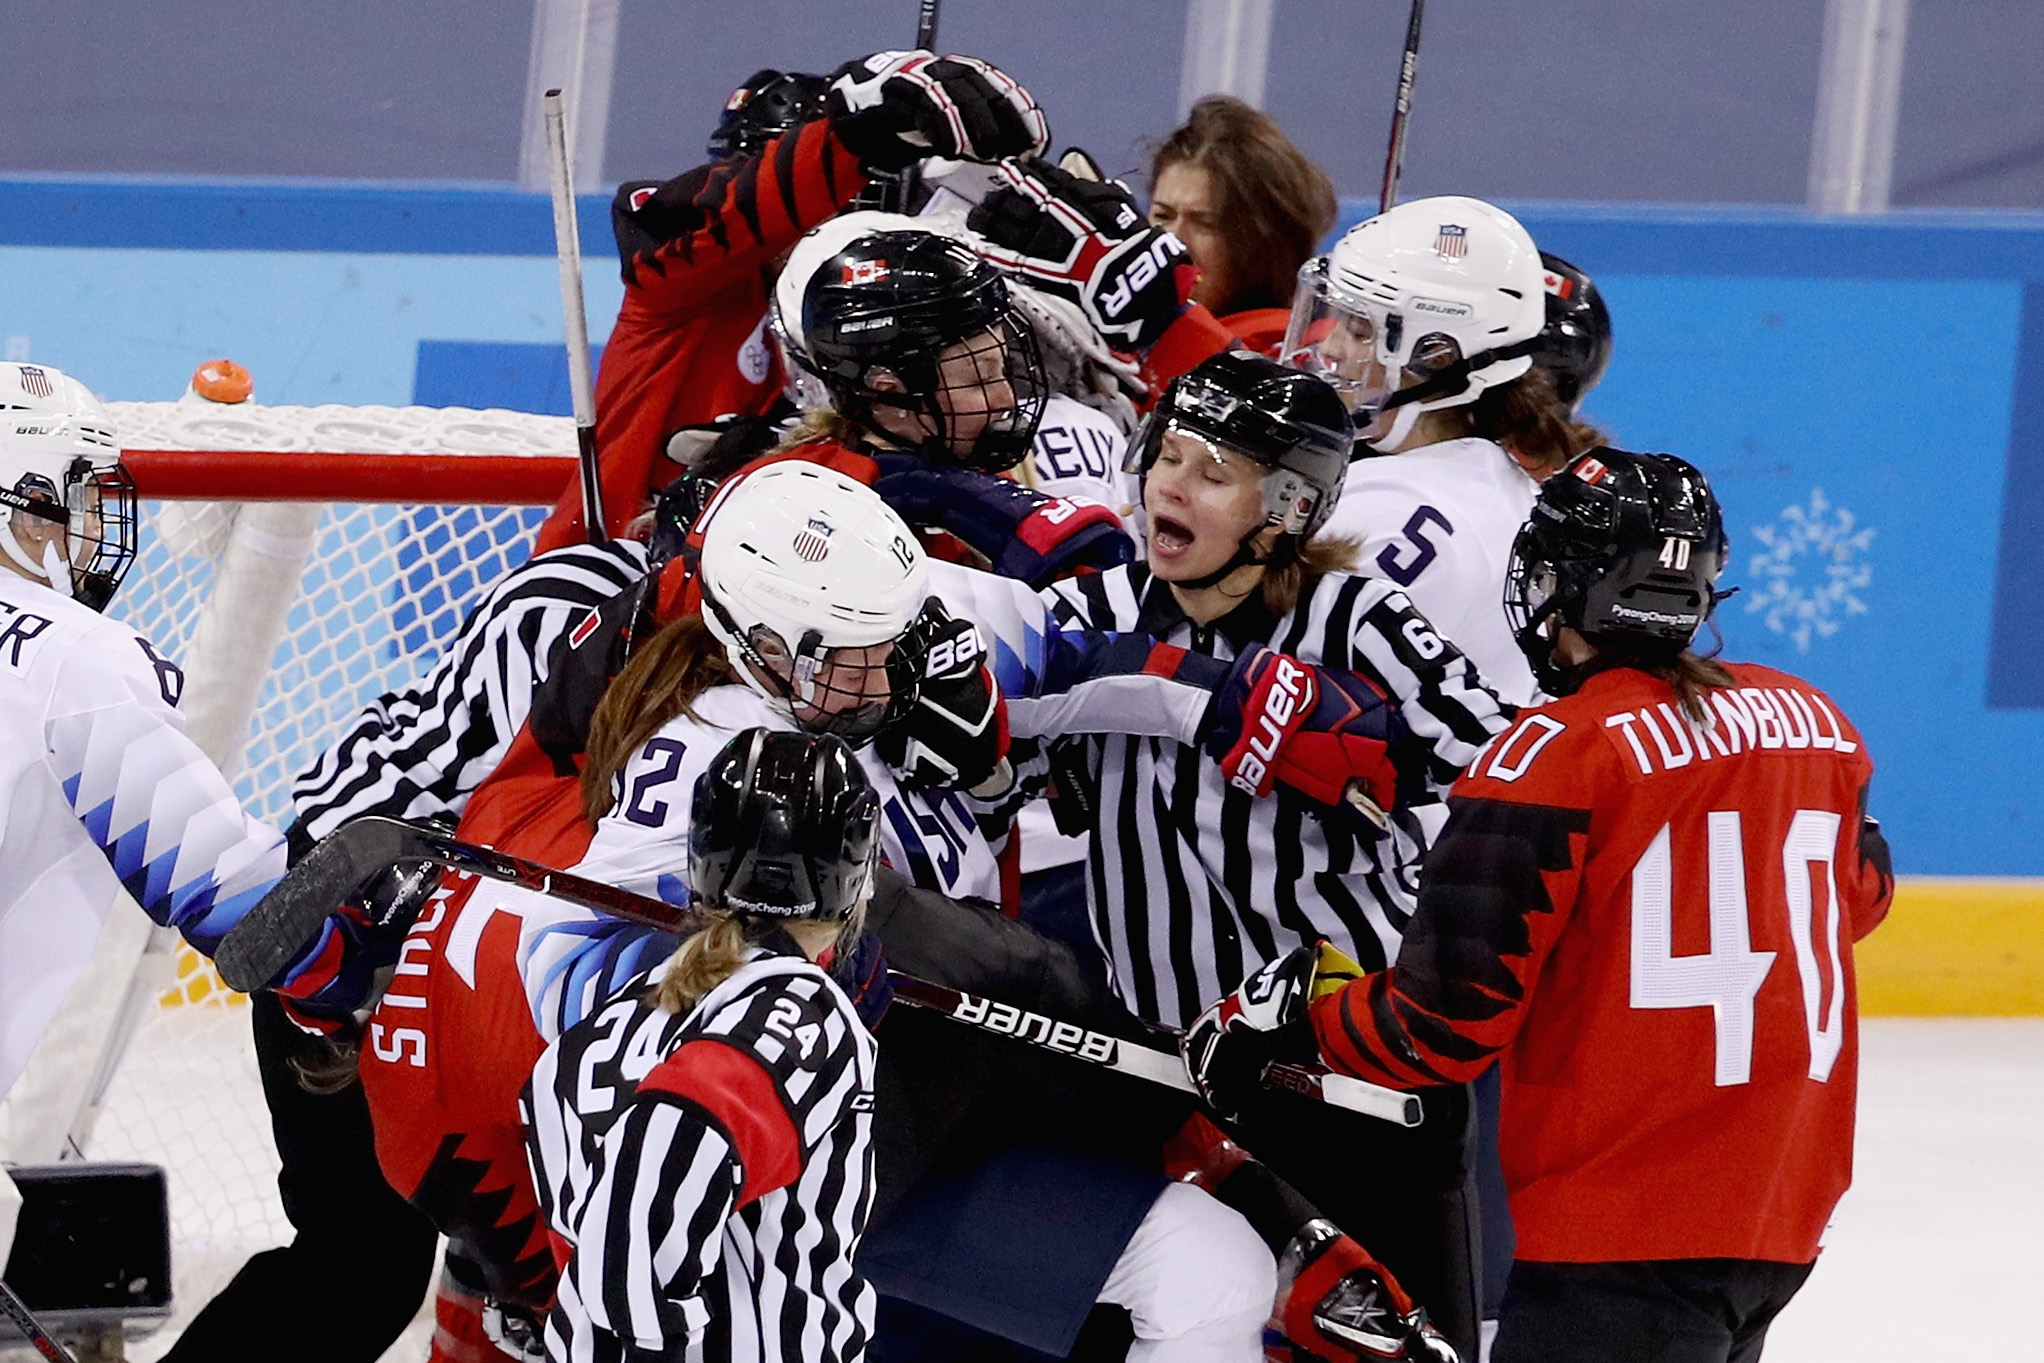 Olympics womens hockey gold medal game, USA vs Canada live stream, start time, TV channel